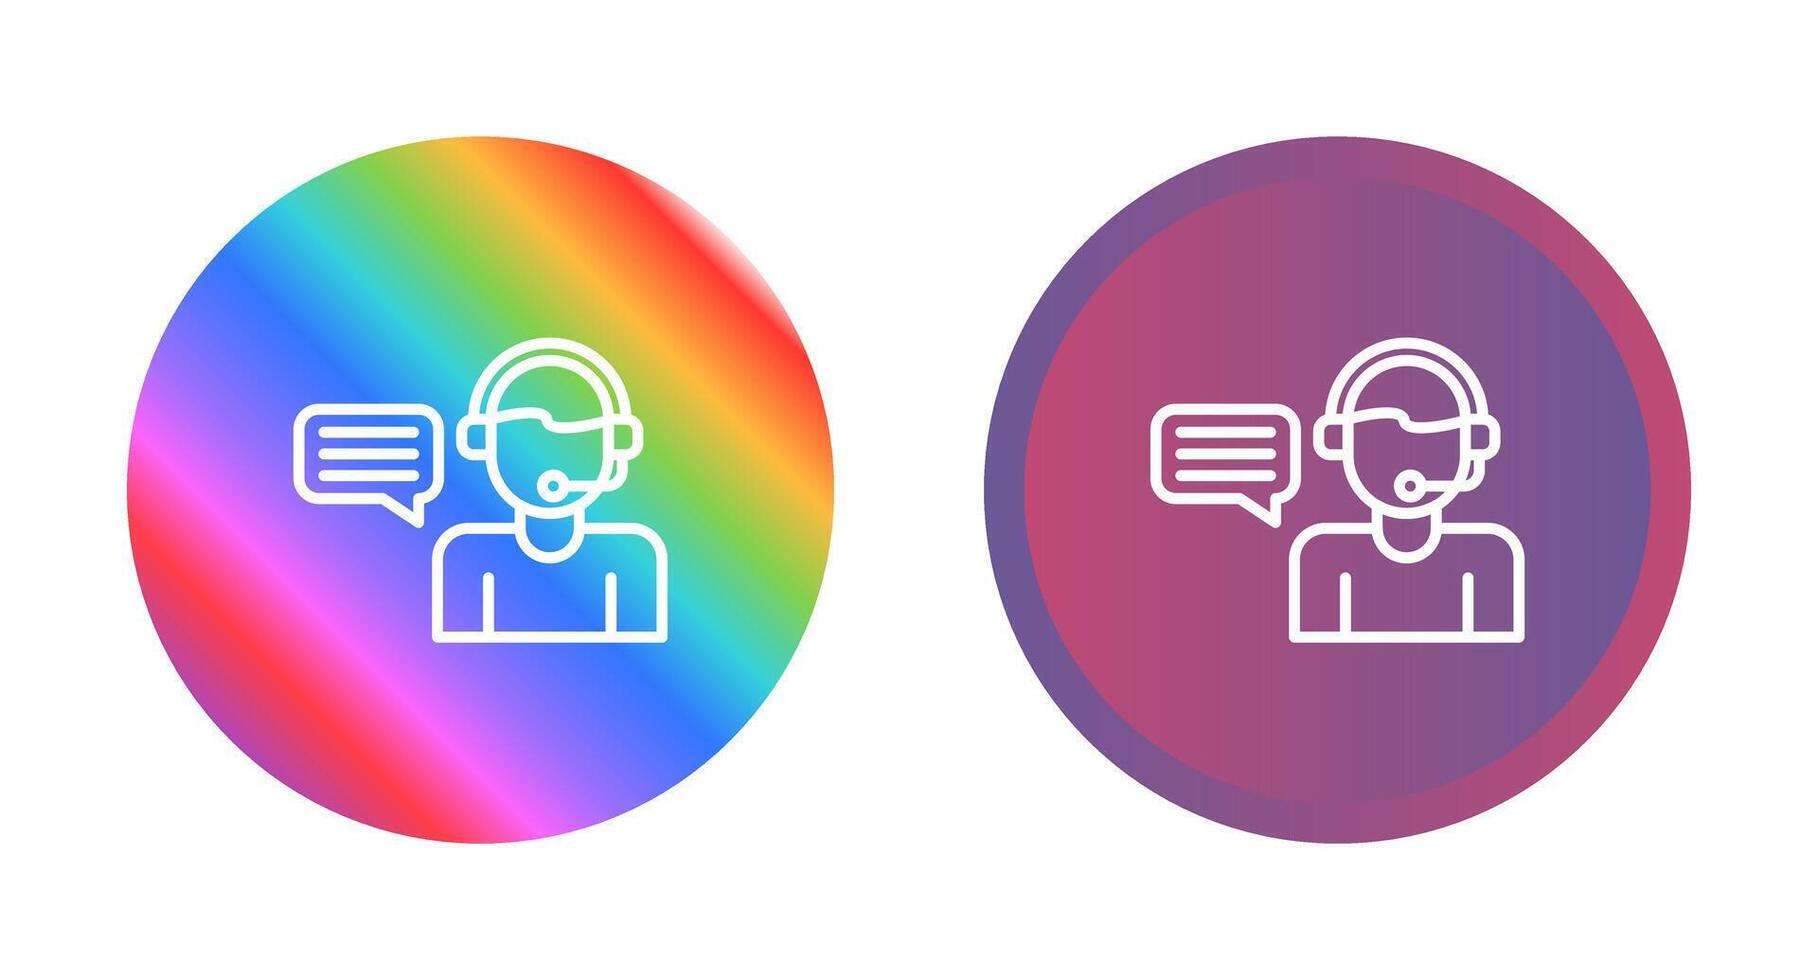 Personal Assistant Vector Icon